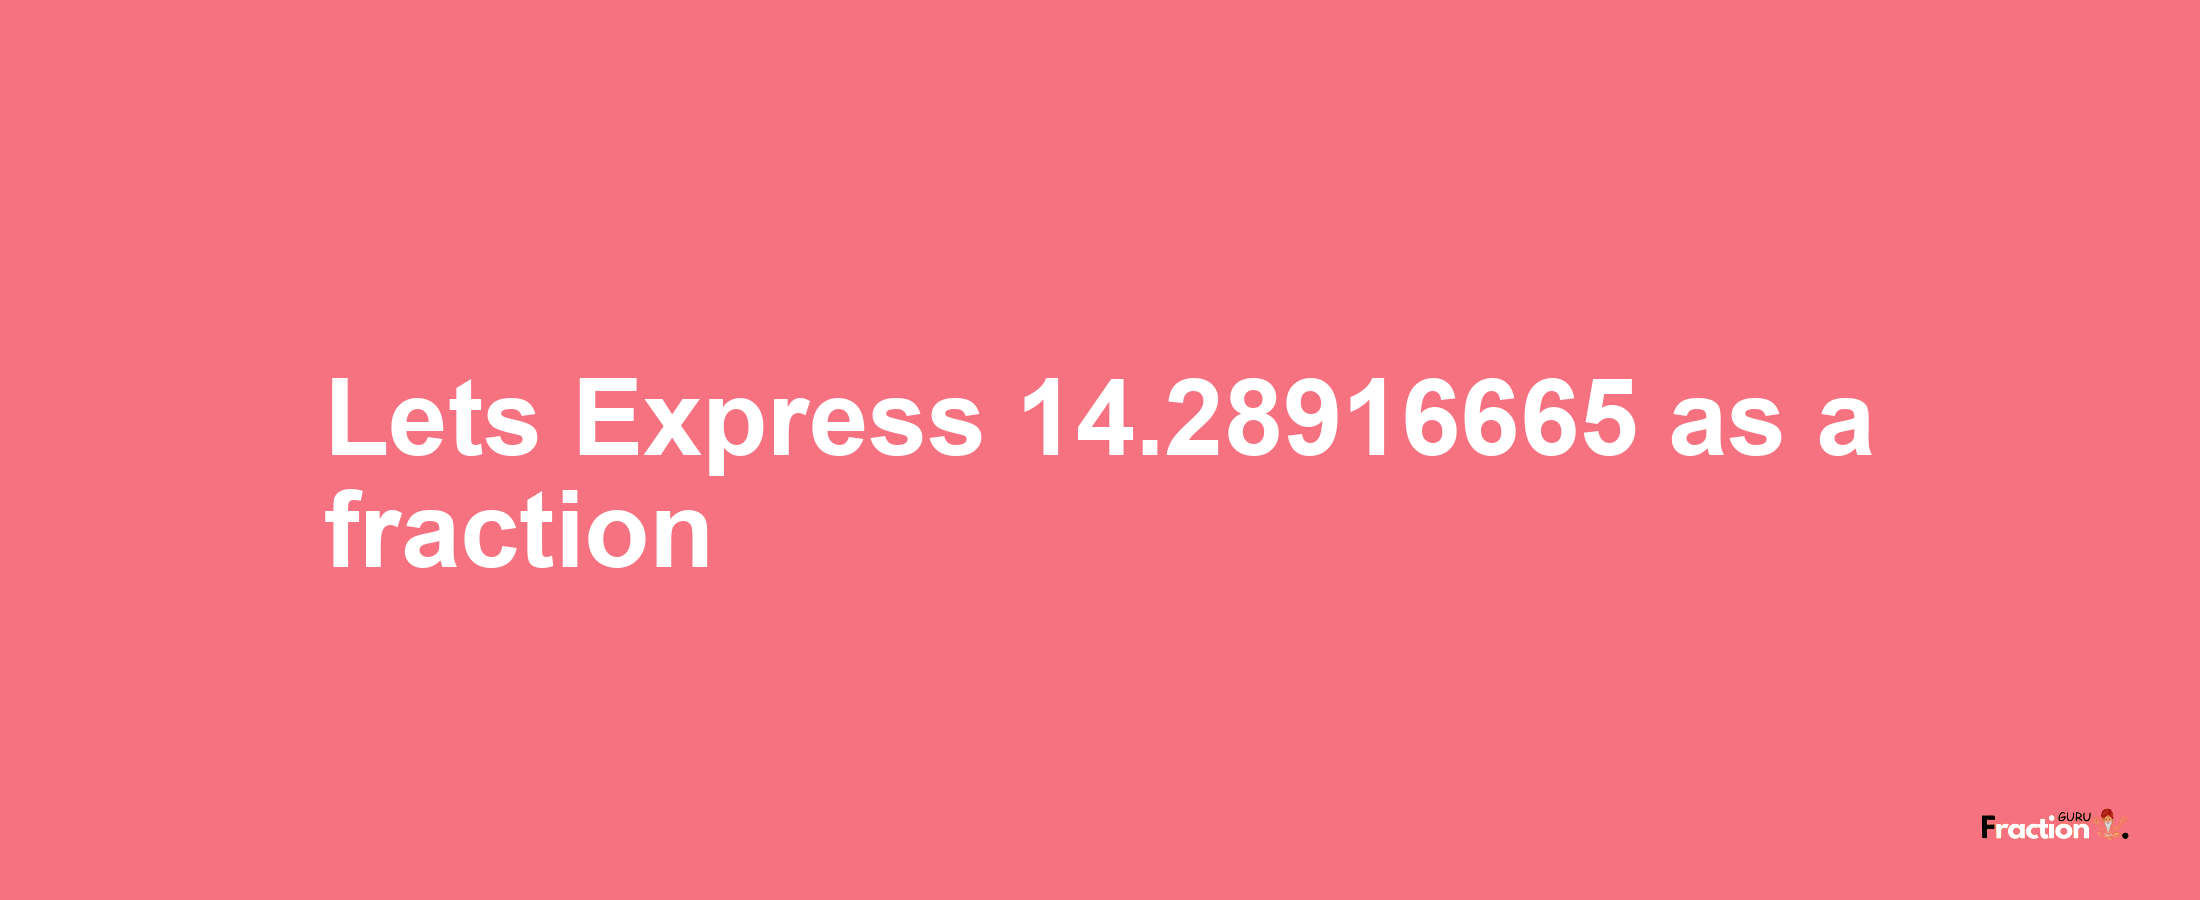 Lets Express 14.28916665 as afraction